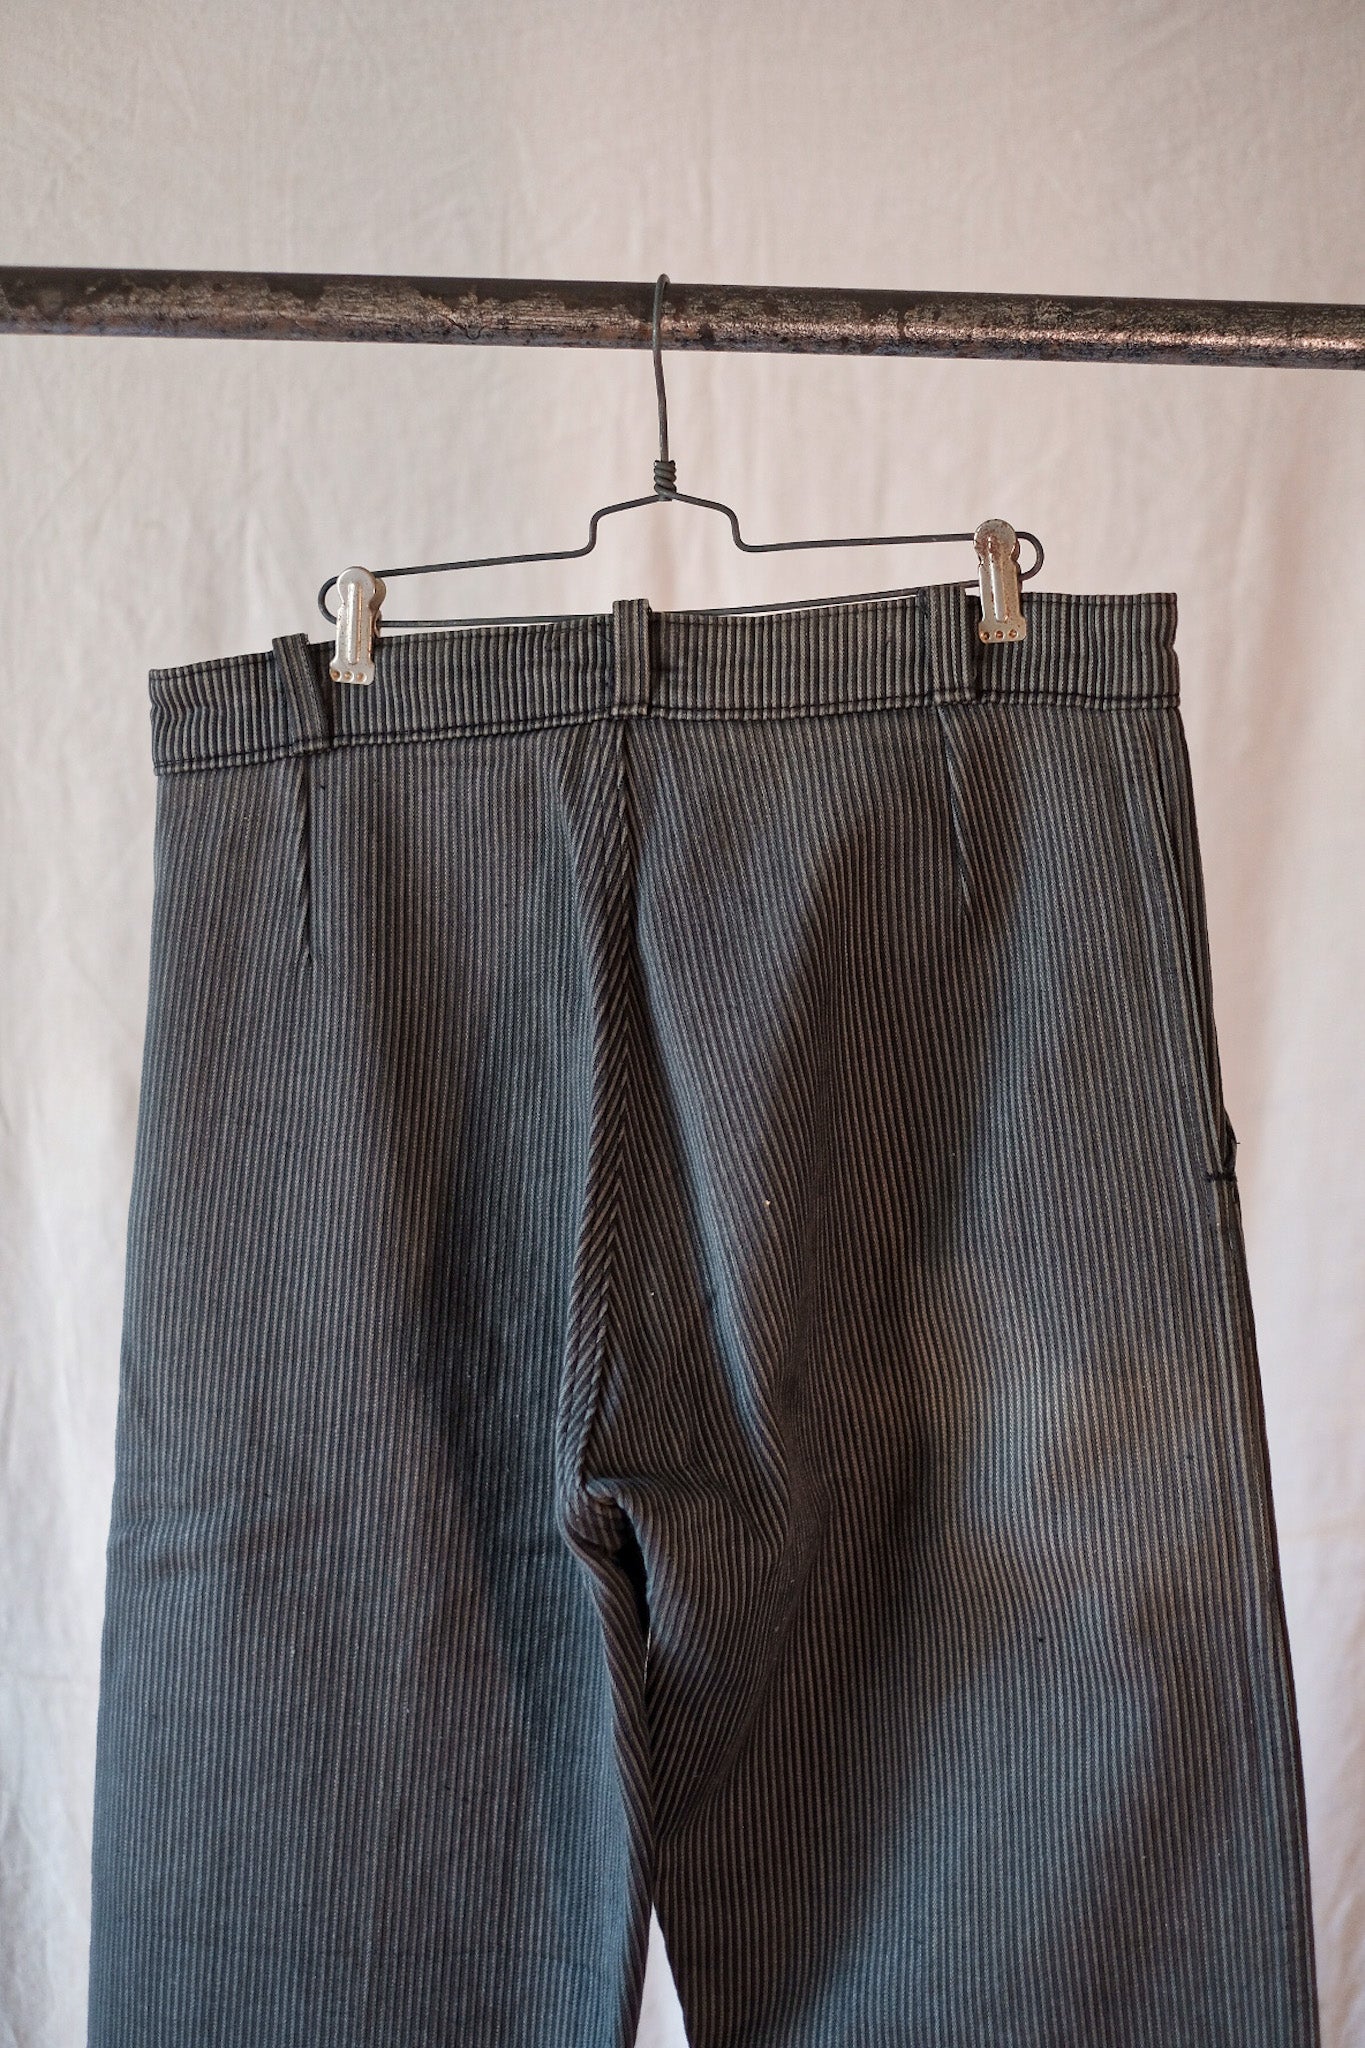 【~40's】French Vintage Gray Cotton Pique Work Pants